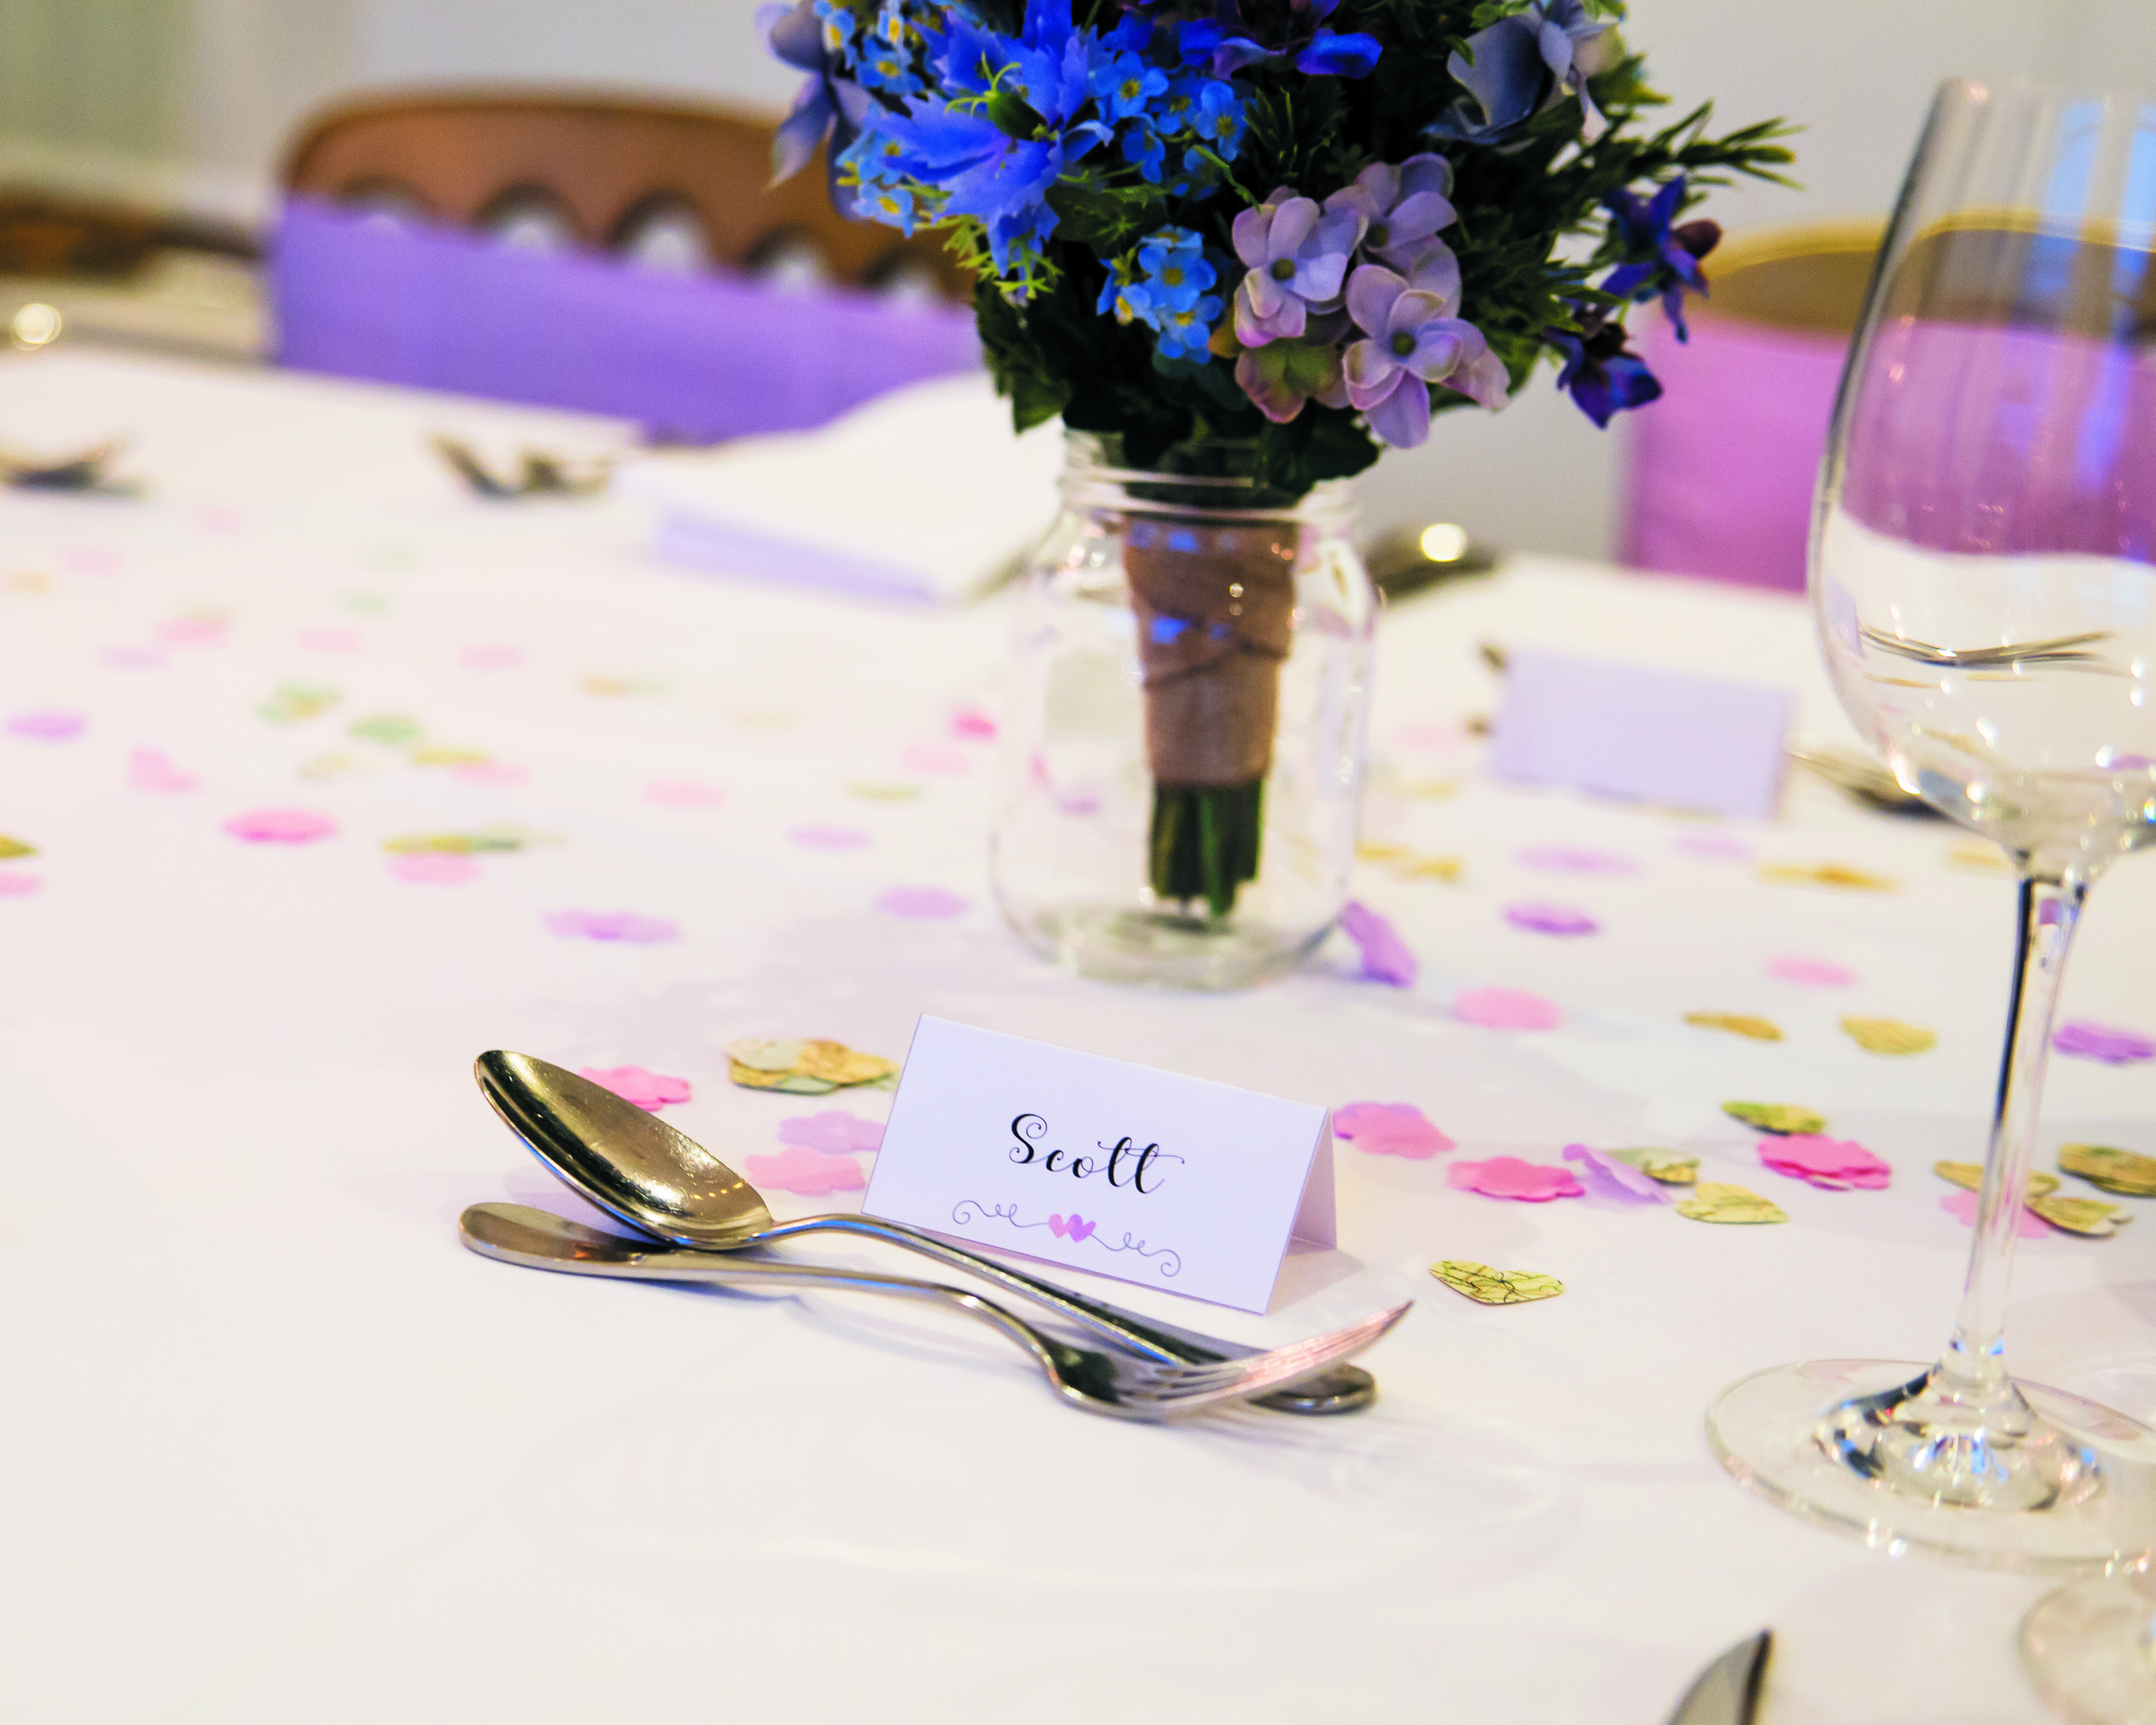 Travel Themed Wedding Ideas We Used in Our Own Celebrations - Confetti